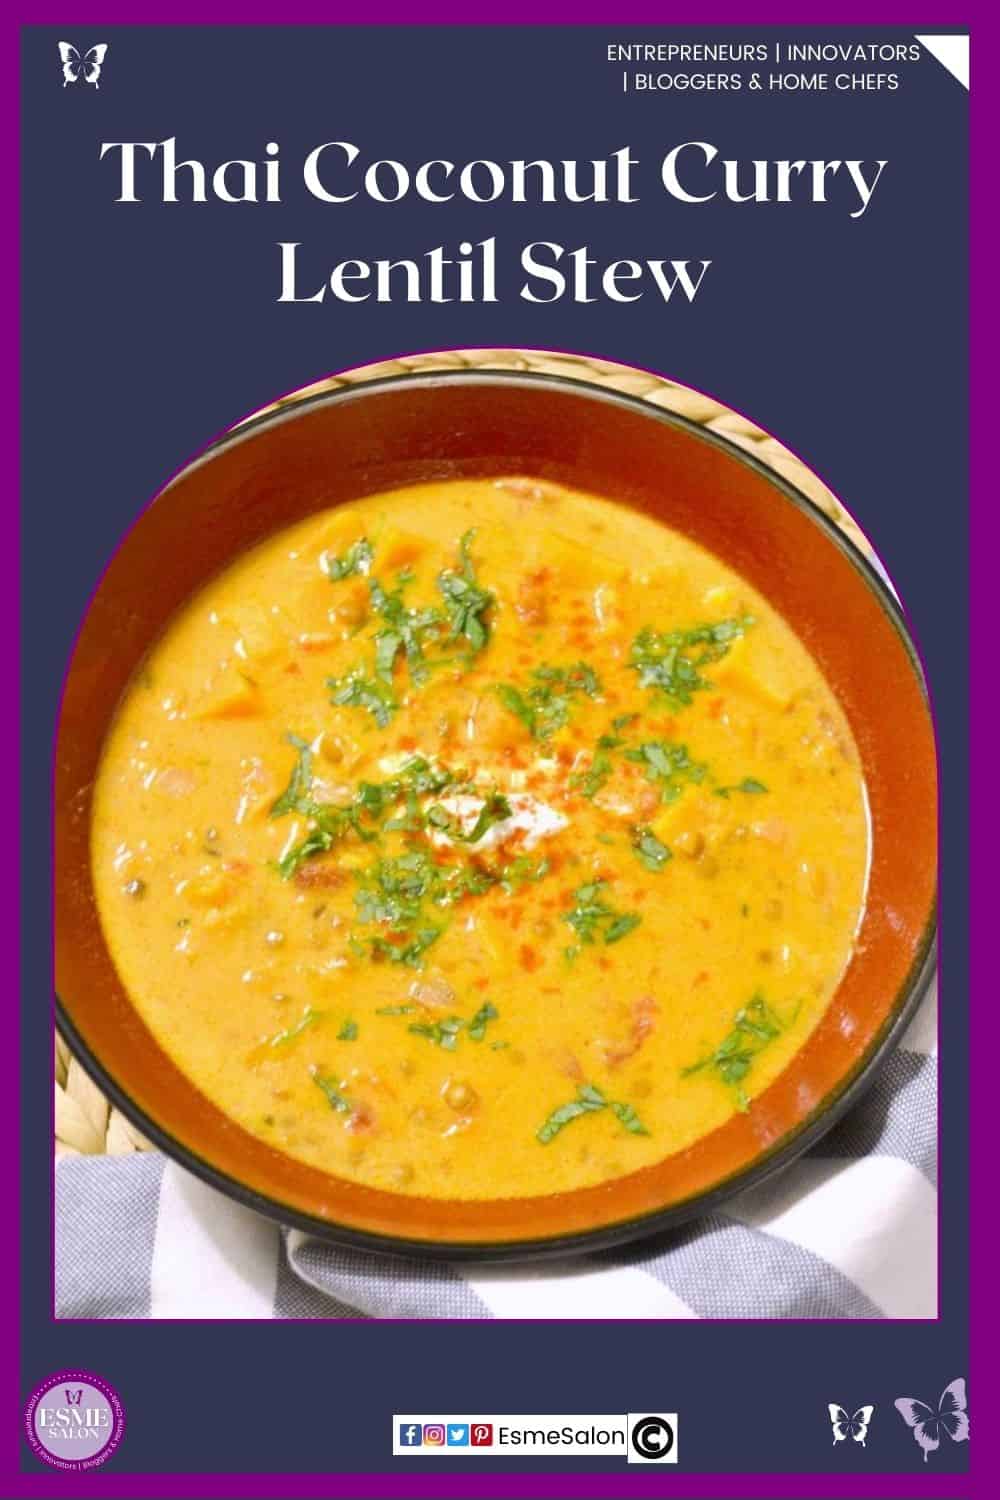 an image of a round brown soup bowl filled with Thai Coconut Curry Lentil Stew garnished with cilantro